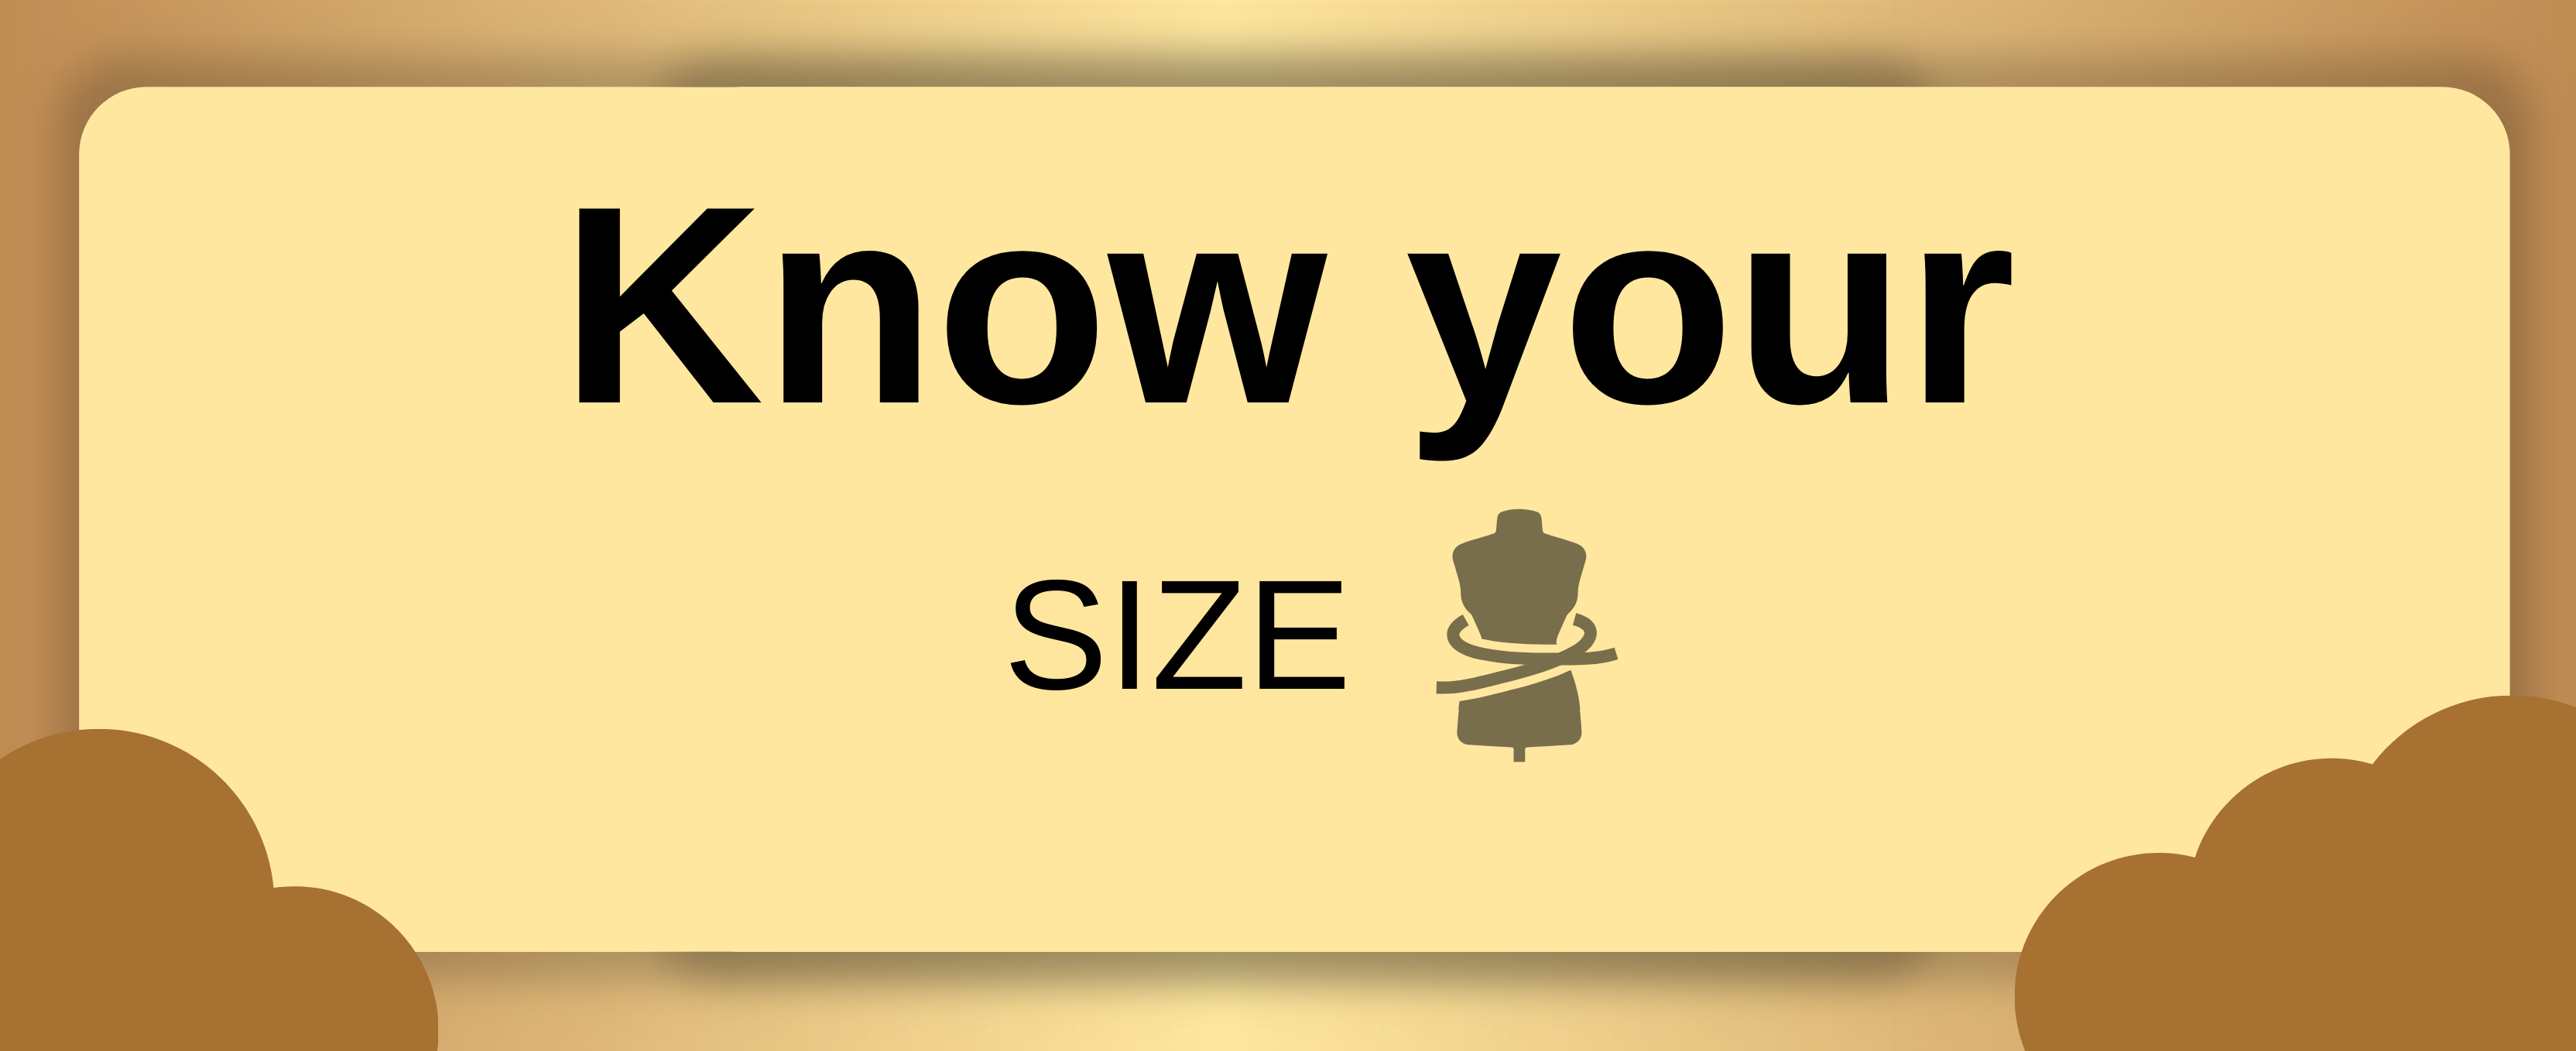 Know your size - Moto Lounge’s extensive size guide